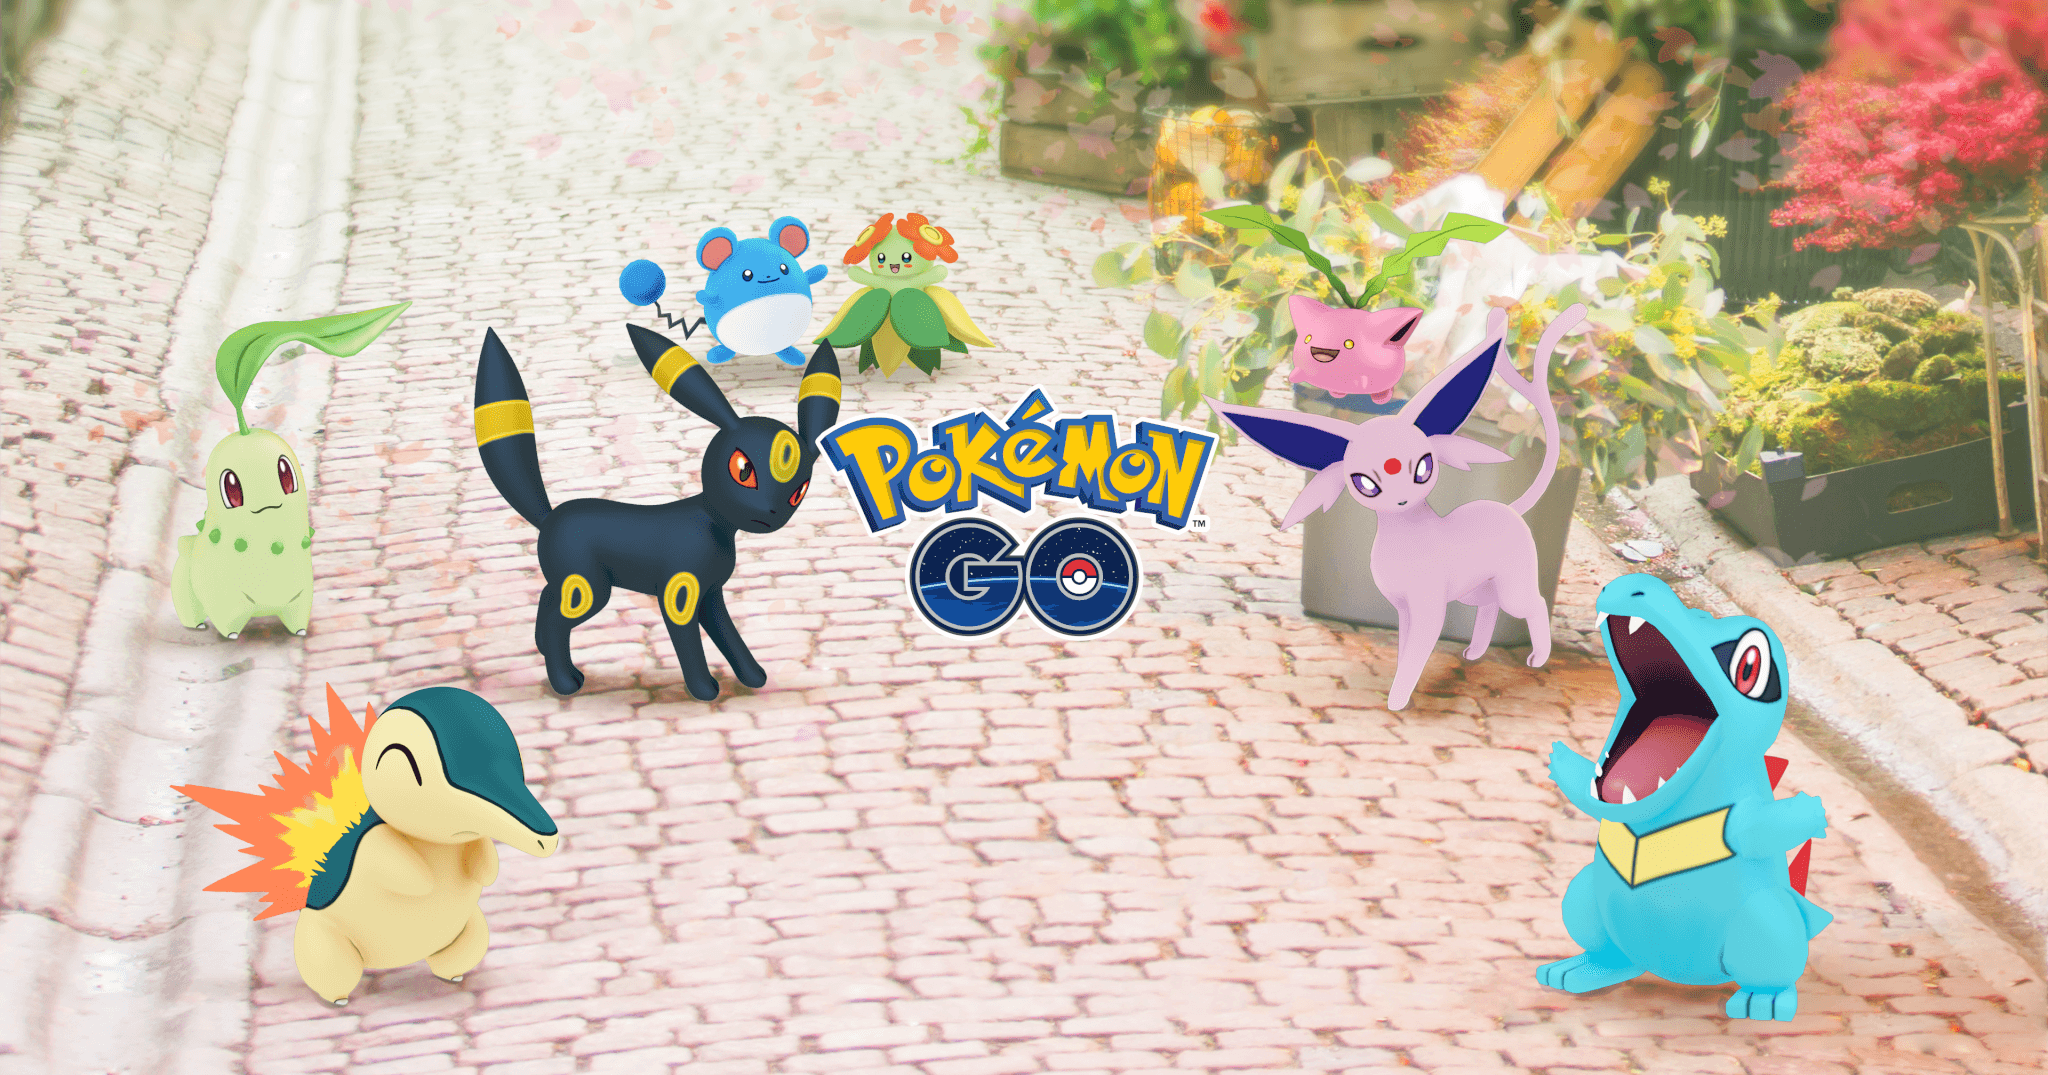 Pokémon Go isn't far from its first anniversary, and it's finally getting a new batch of non-egg pocket monsters.